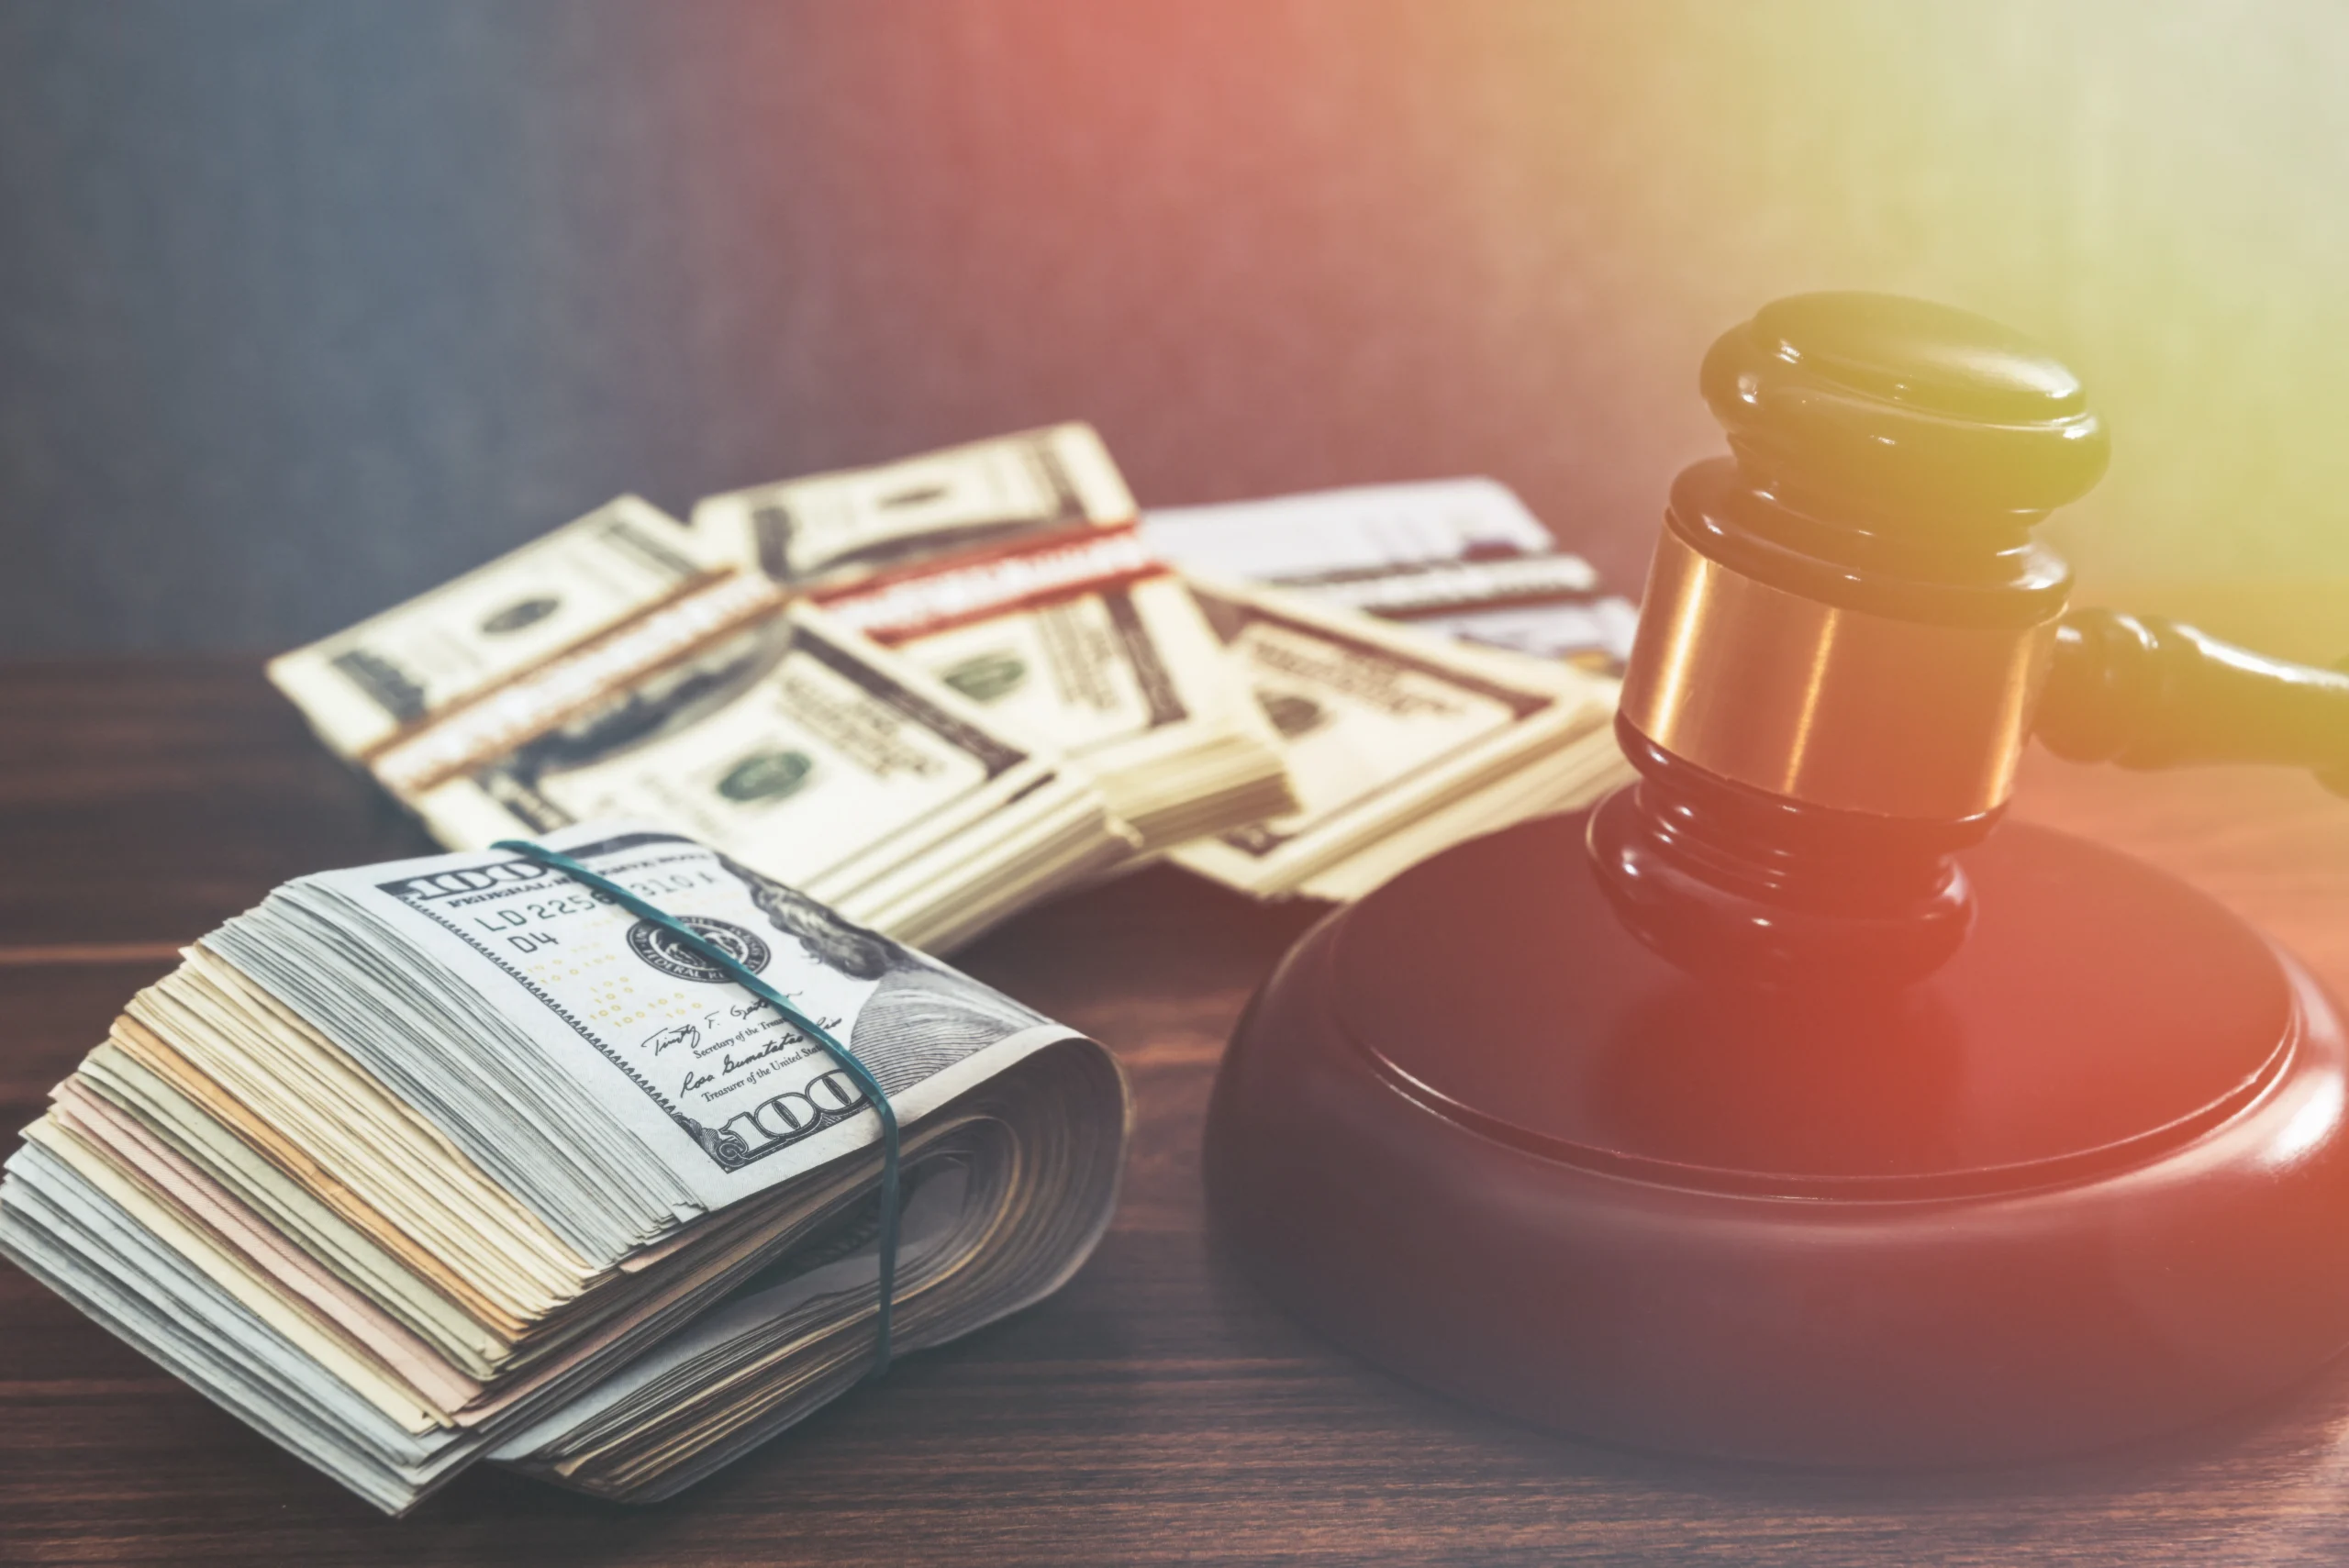 Justice gavel and stack of dollar bills sit on a table. Find out more about some of the commonly asked questions regarding IRS collection defense in Texas.